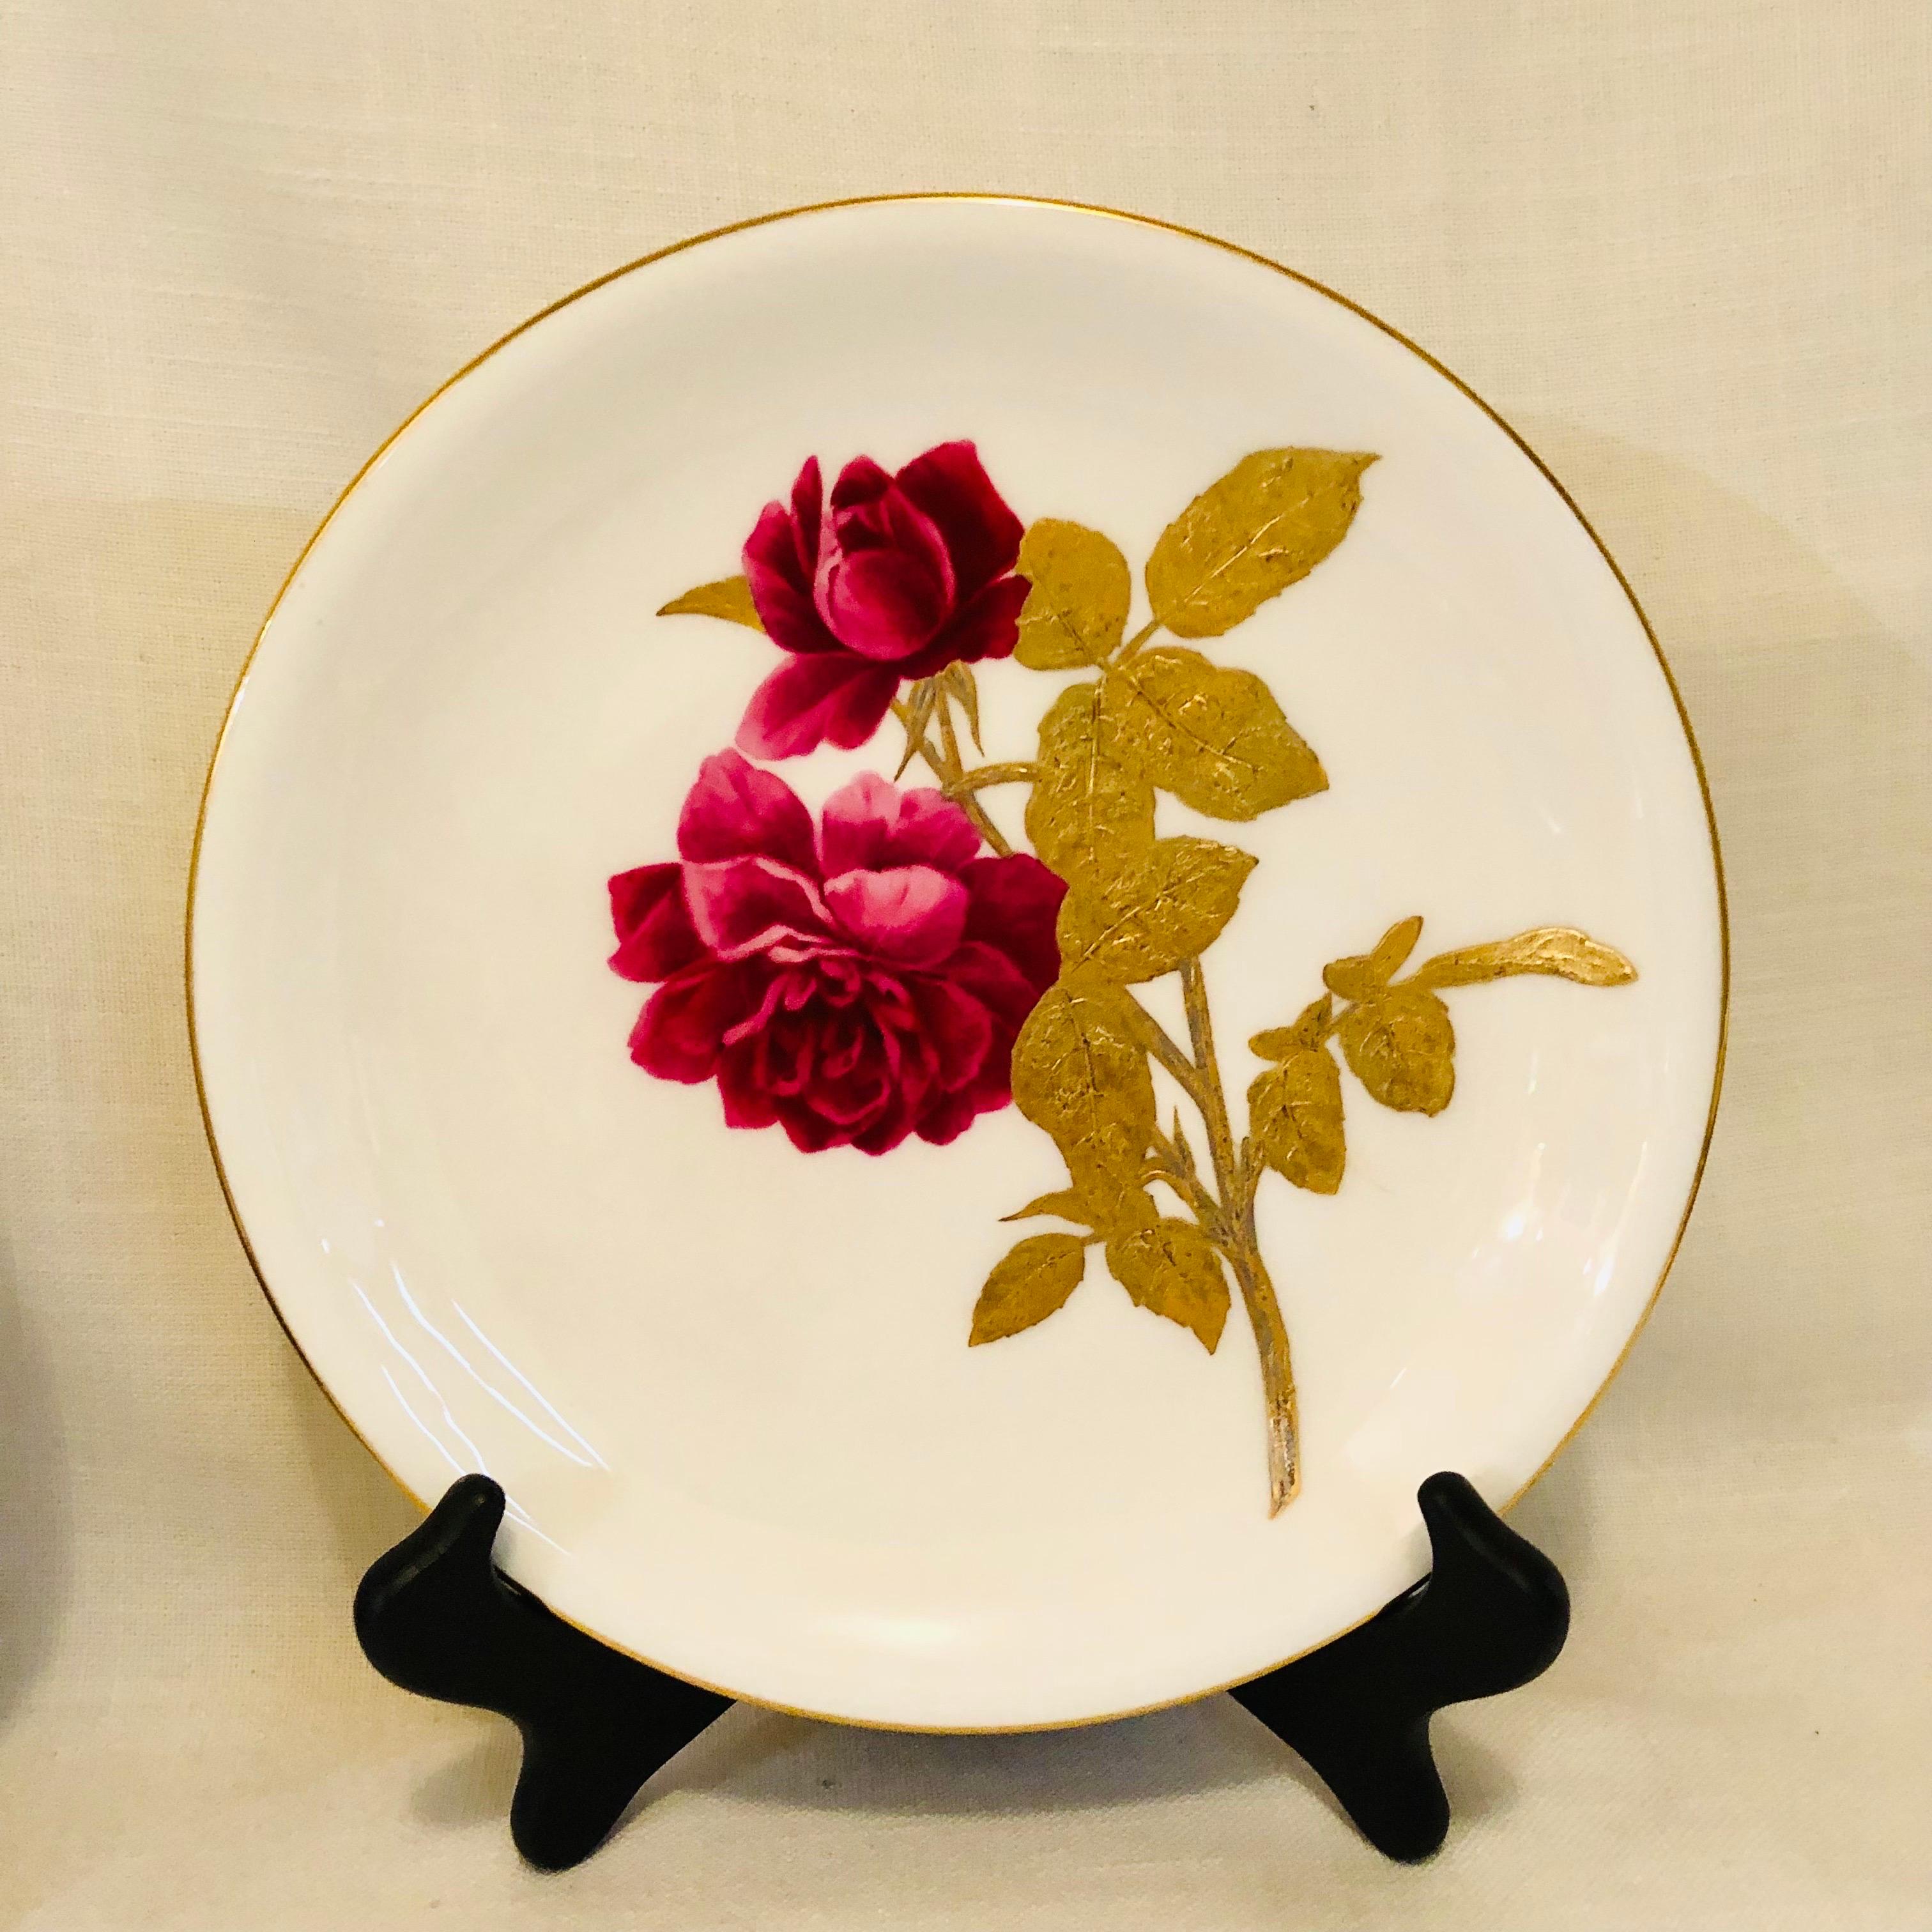 Porcelain Minton Plates Each Painted With a Different Rose With Gold and Platinum Accents